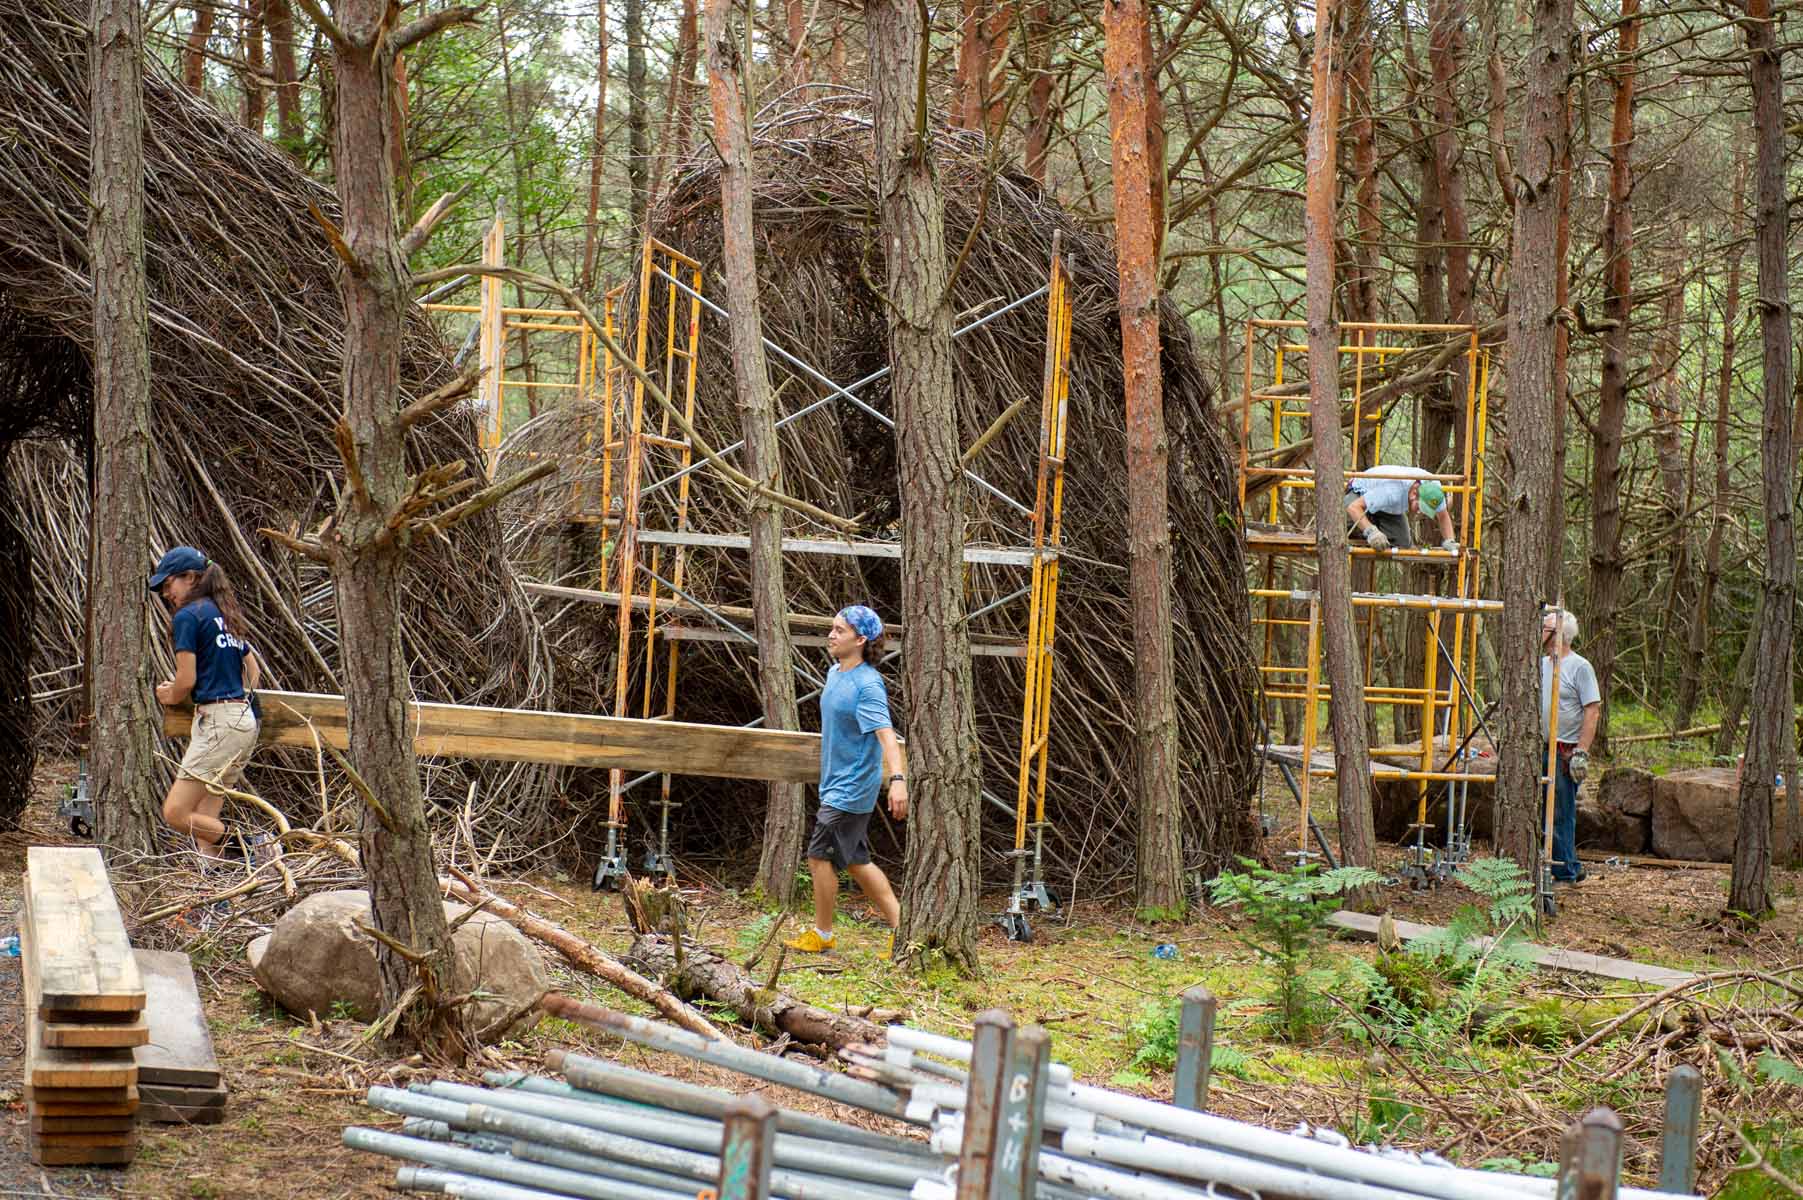 Workers constructing "Hopscotch" by Patrick Dougherty at the Wild Center